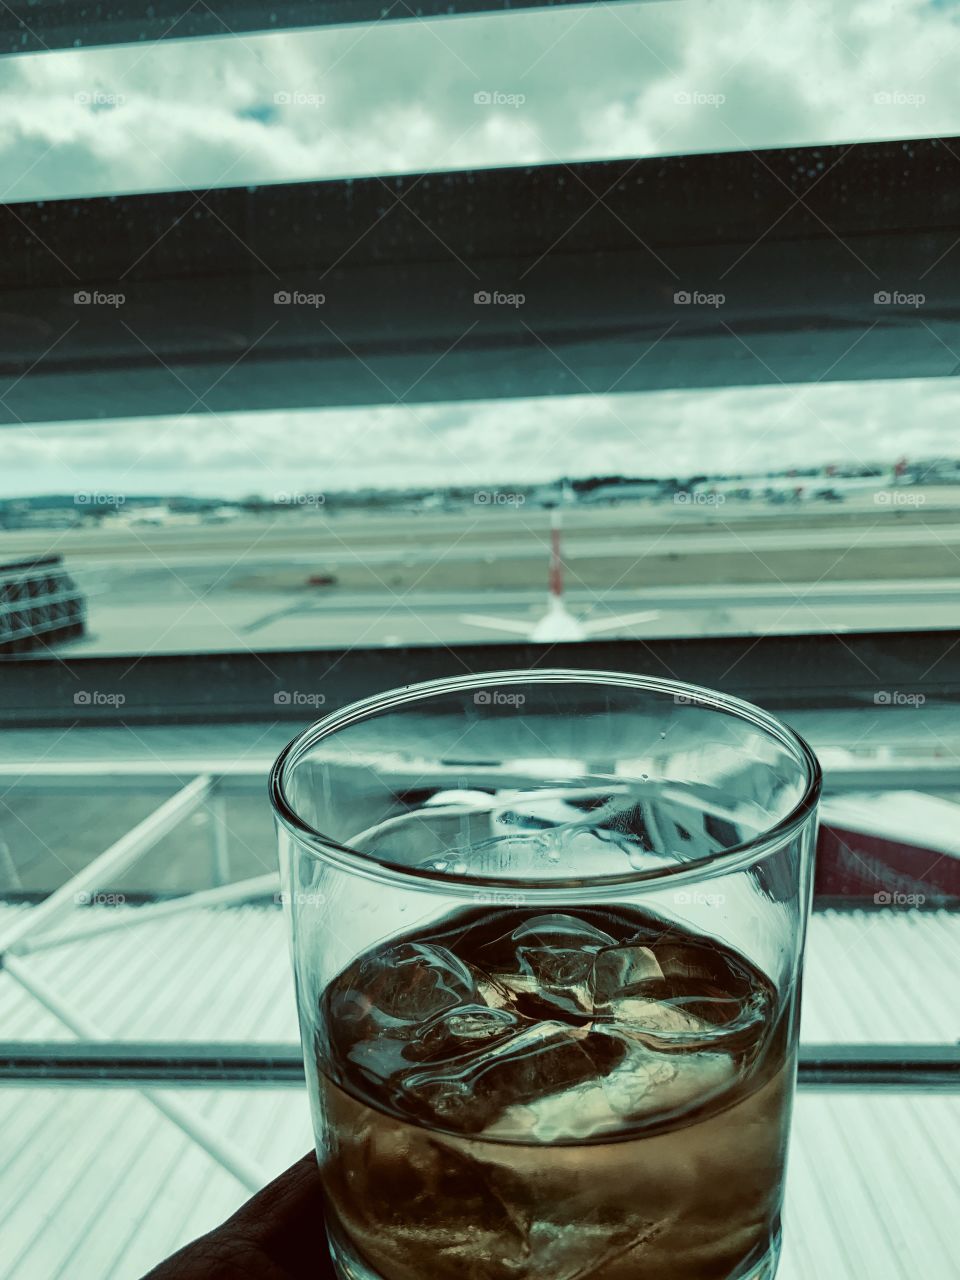 A whisky at Lisbon Airport in December... 